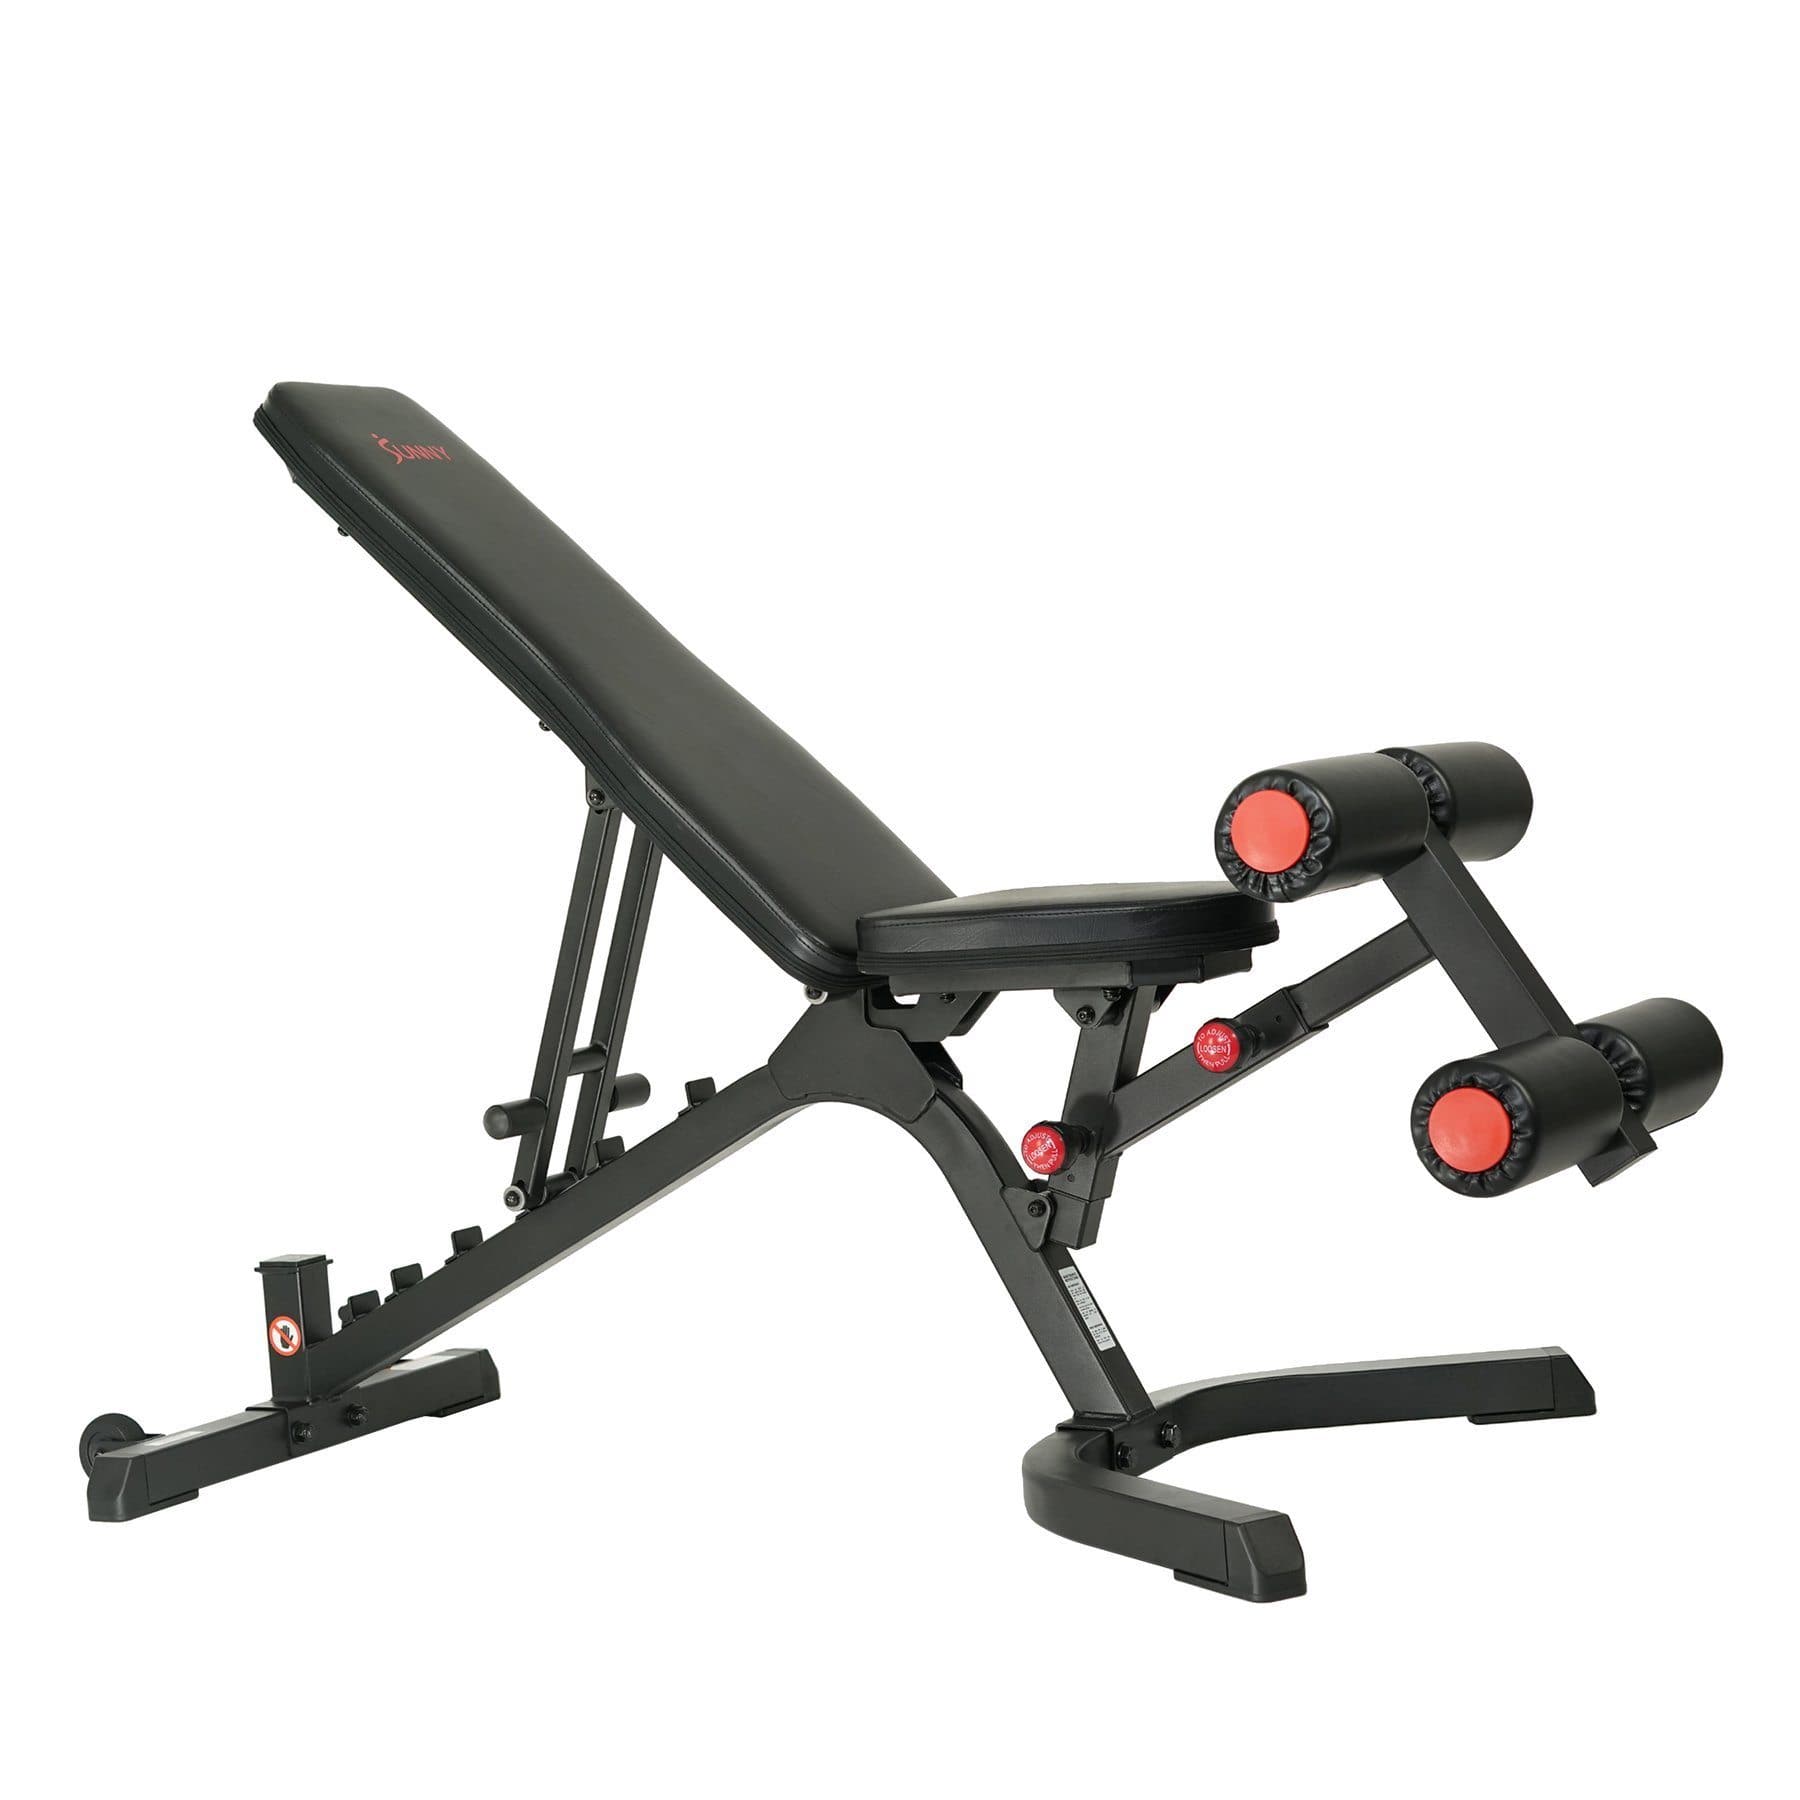 Fully Adjustable Power Zone Utility Bench bench/rack Sunny Health and Fitness 